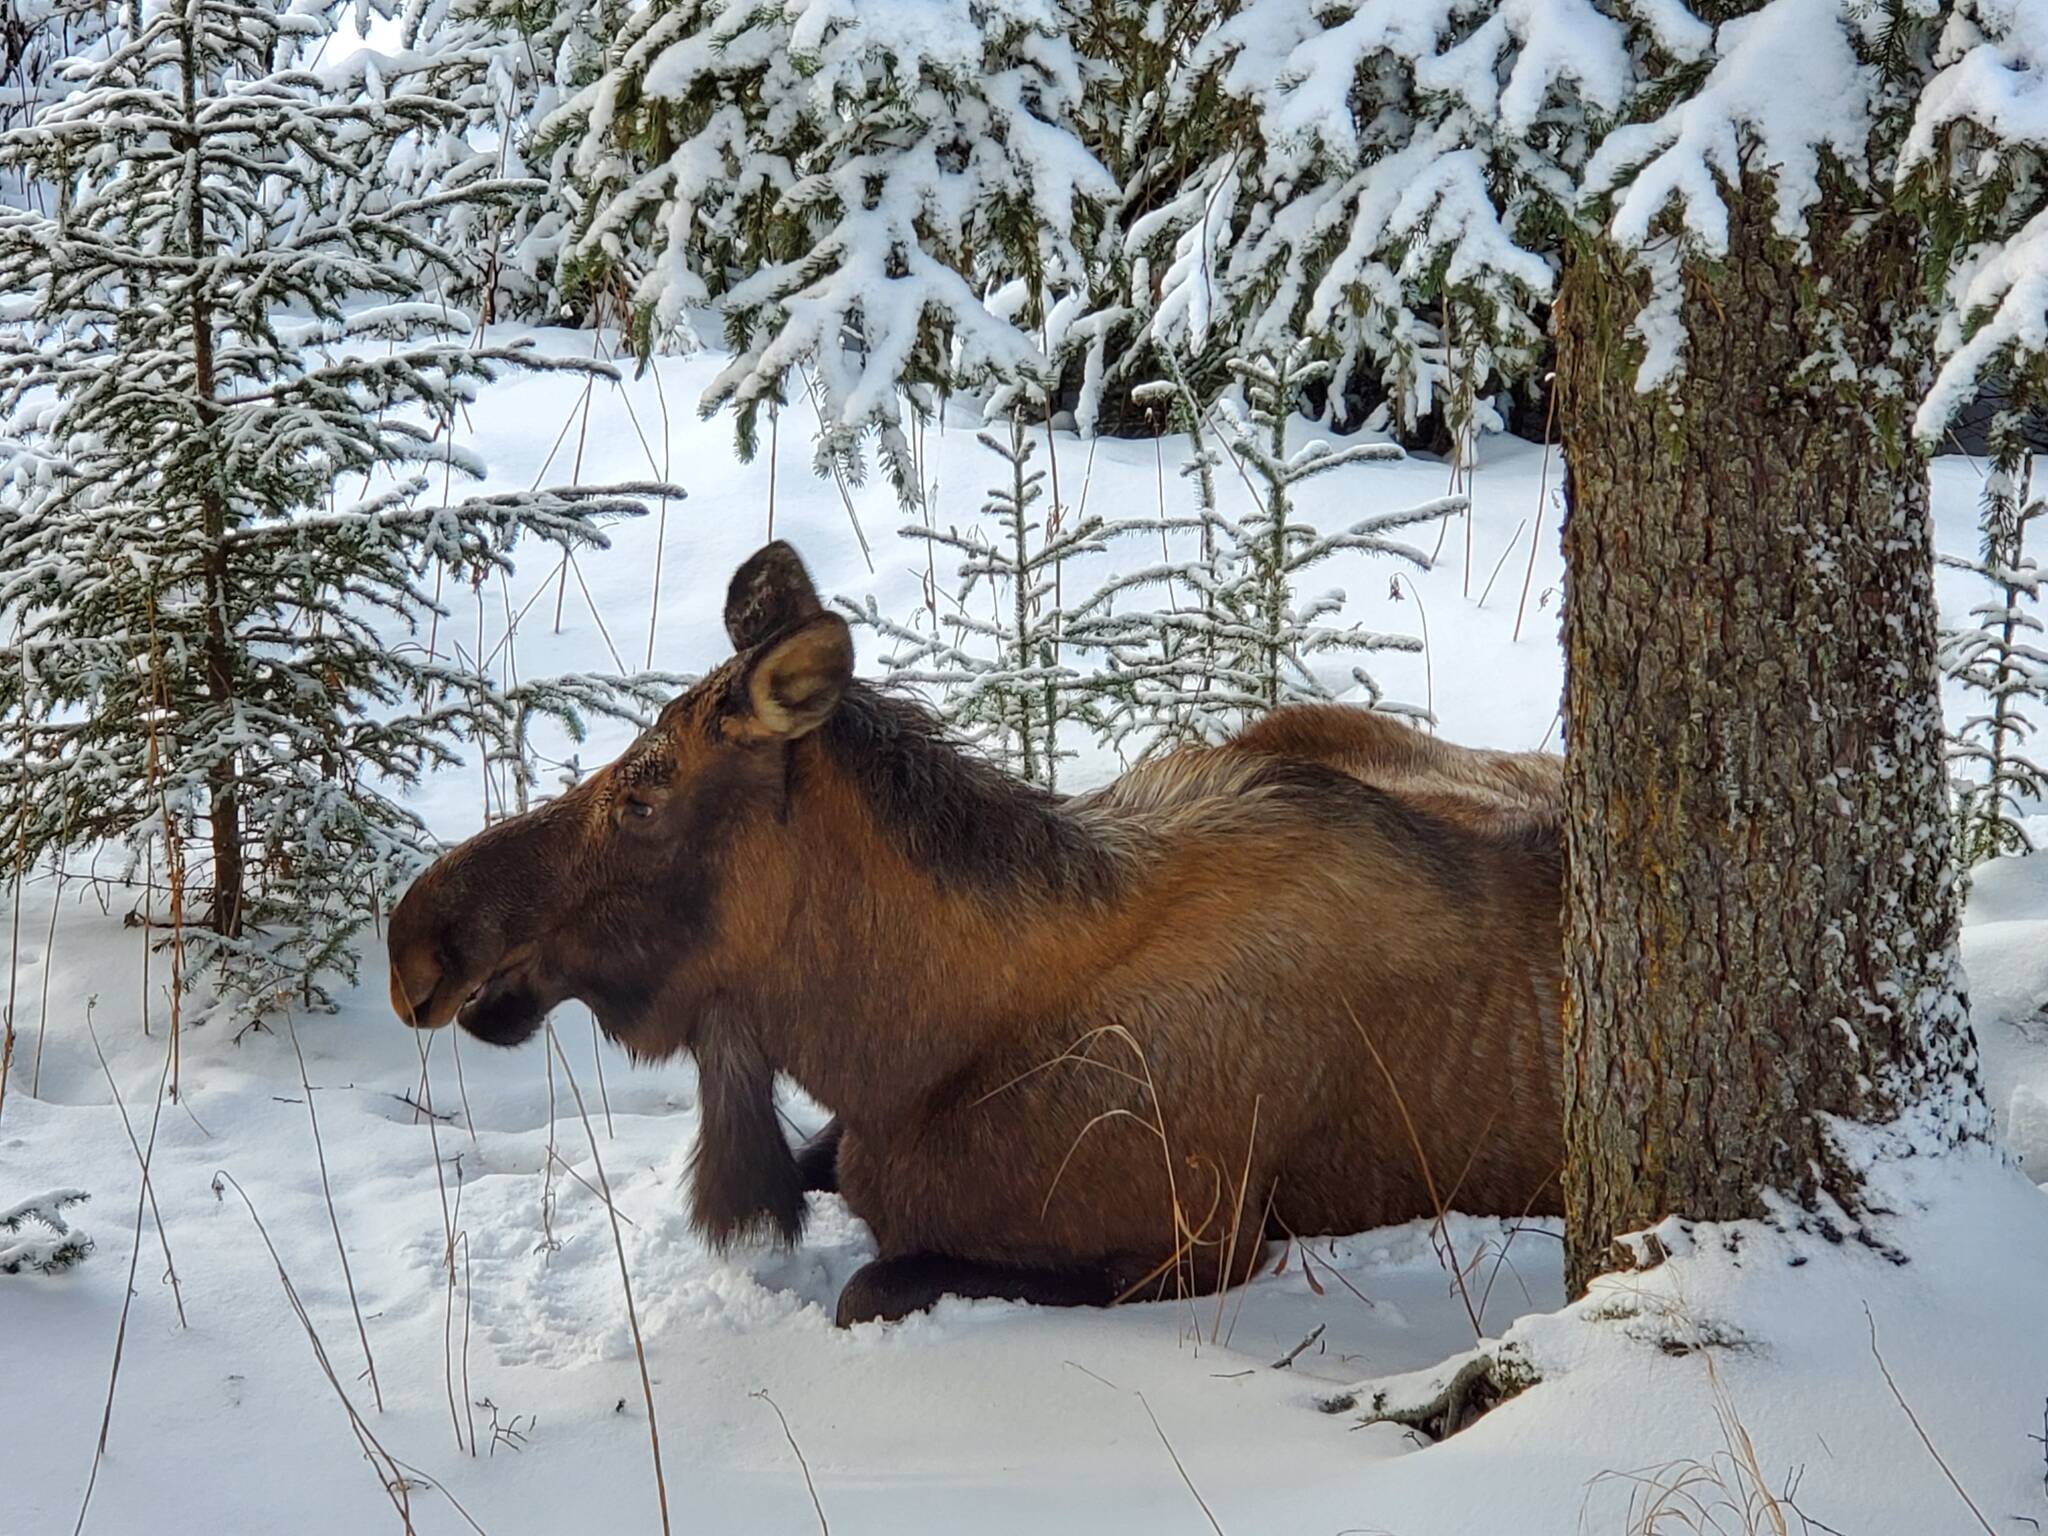 An adult female moose rests in the snow under a spruce tree on Wednesday, Jan. 18 in Anchor Point. Photo by Delcenia Cosman